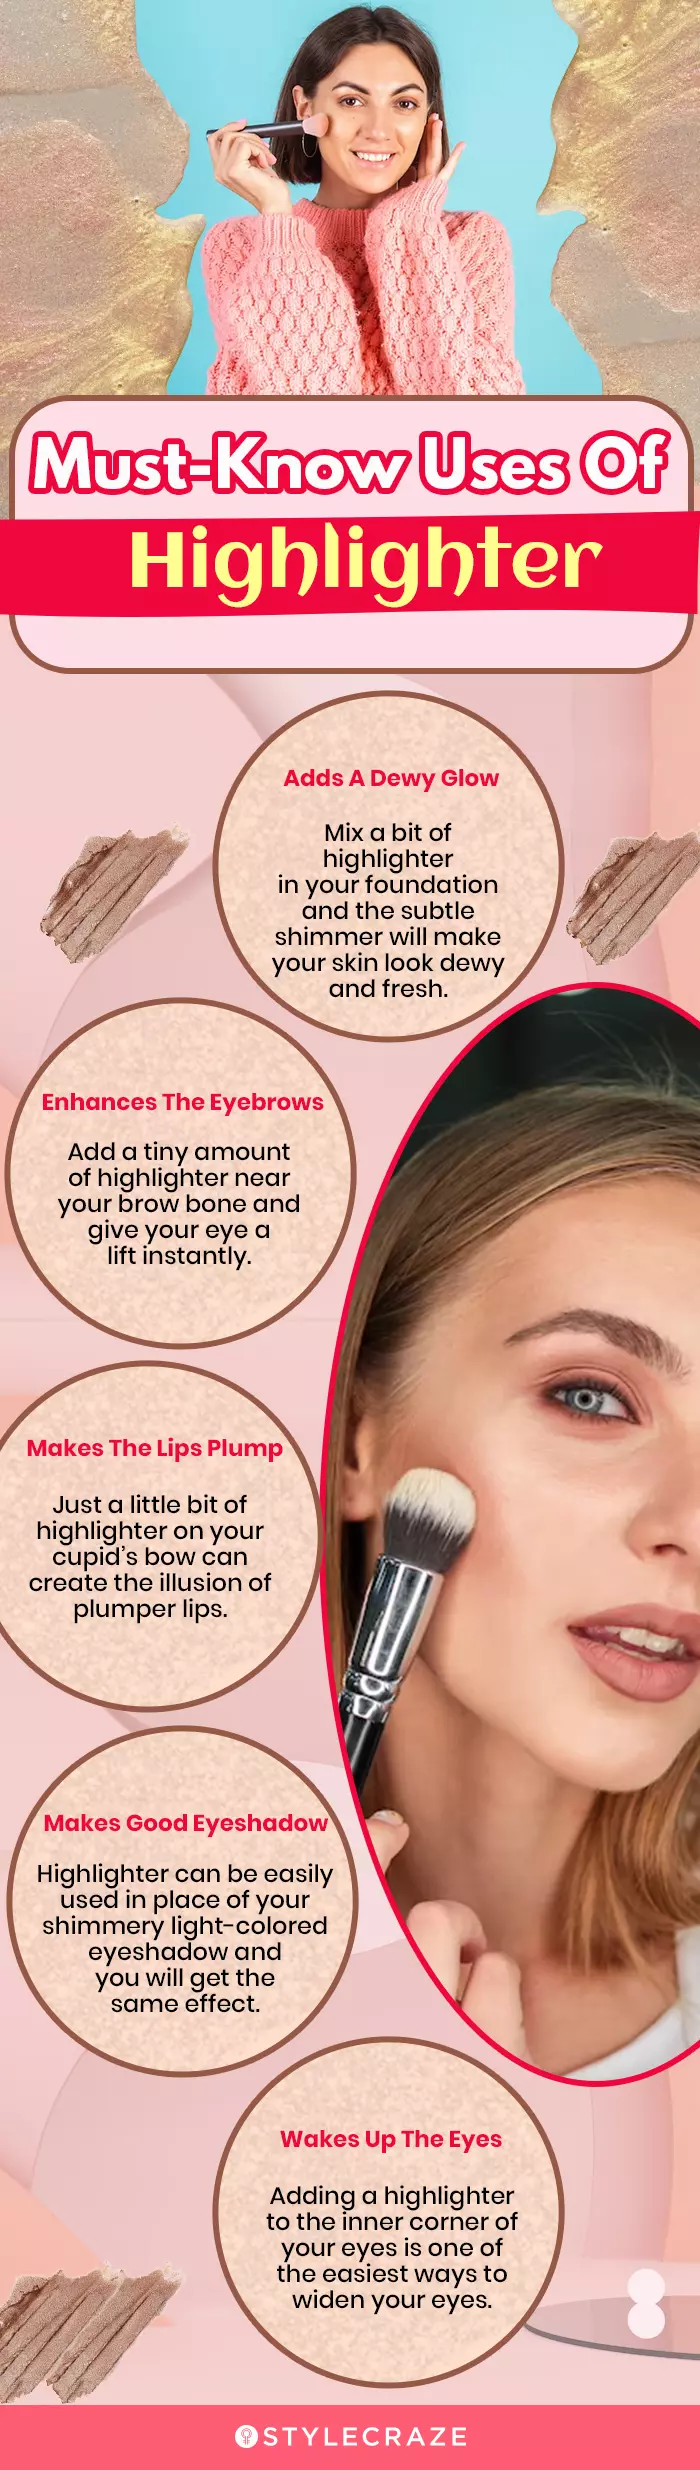 Hidden Uses Of Your Highlighter (infographic)